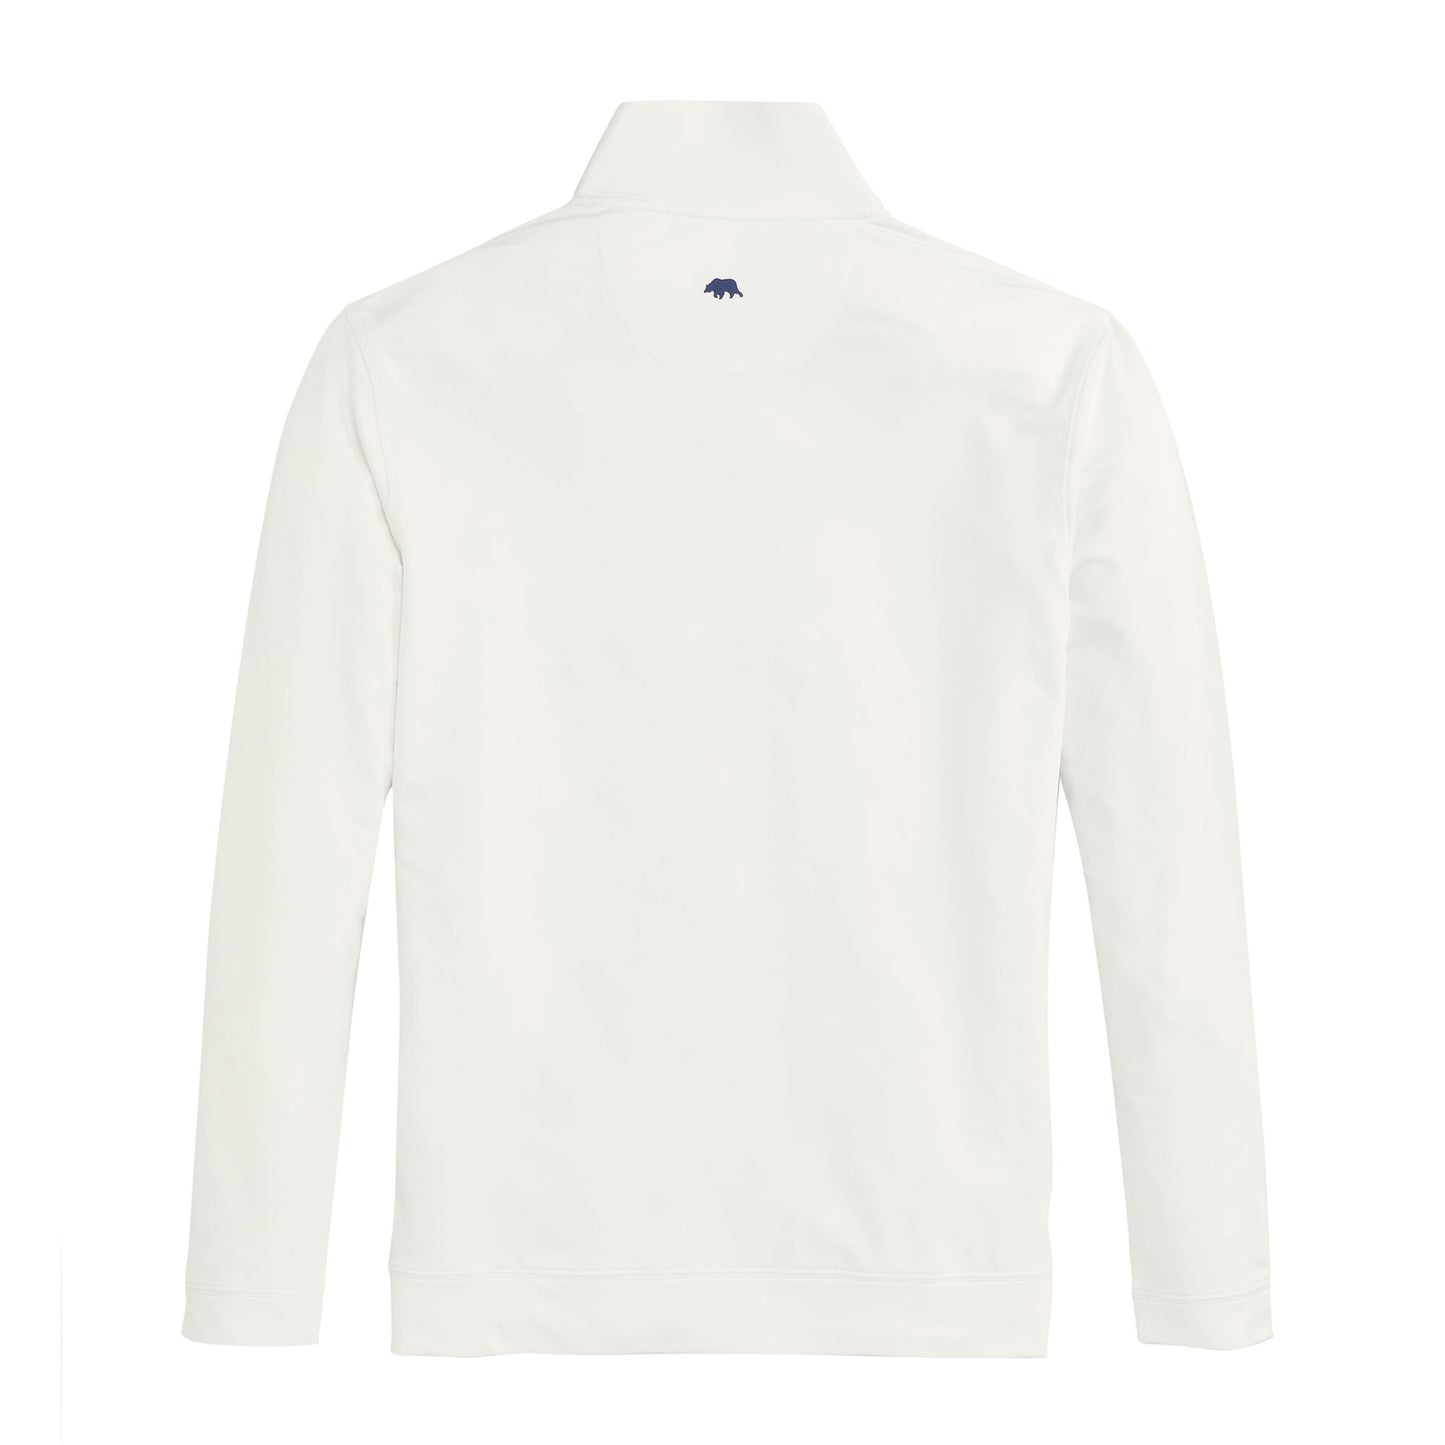 Flow Performance 1/4 Zip Pullover - White